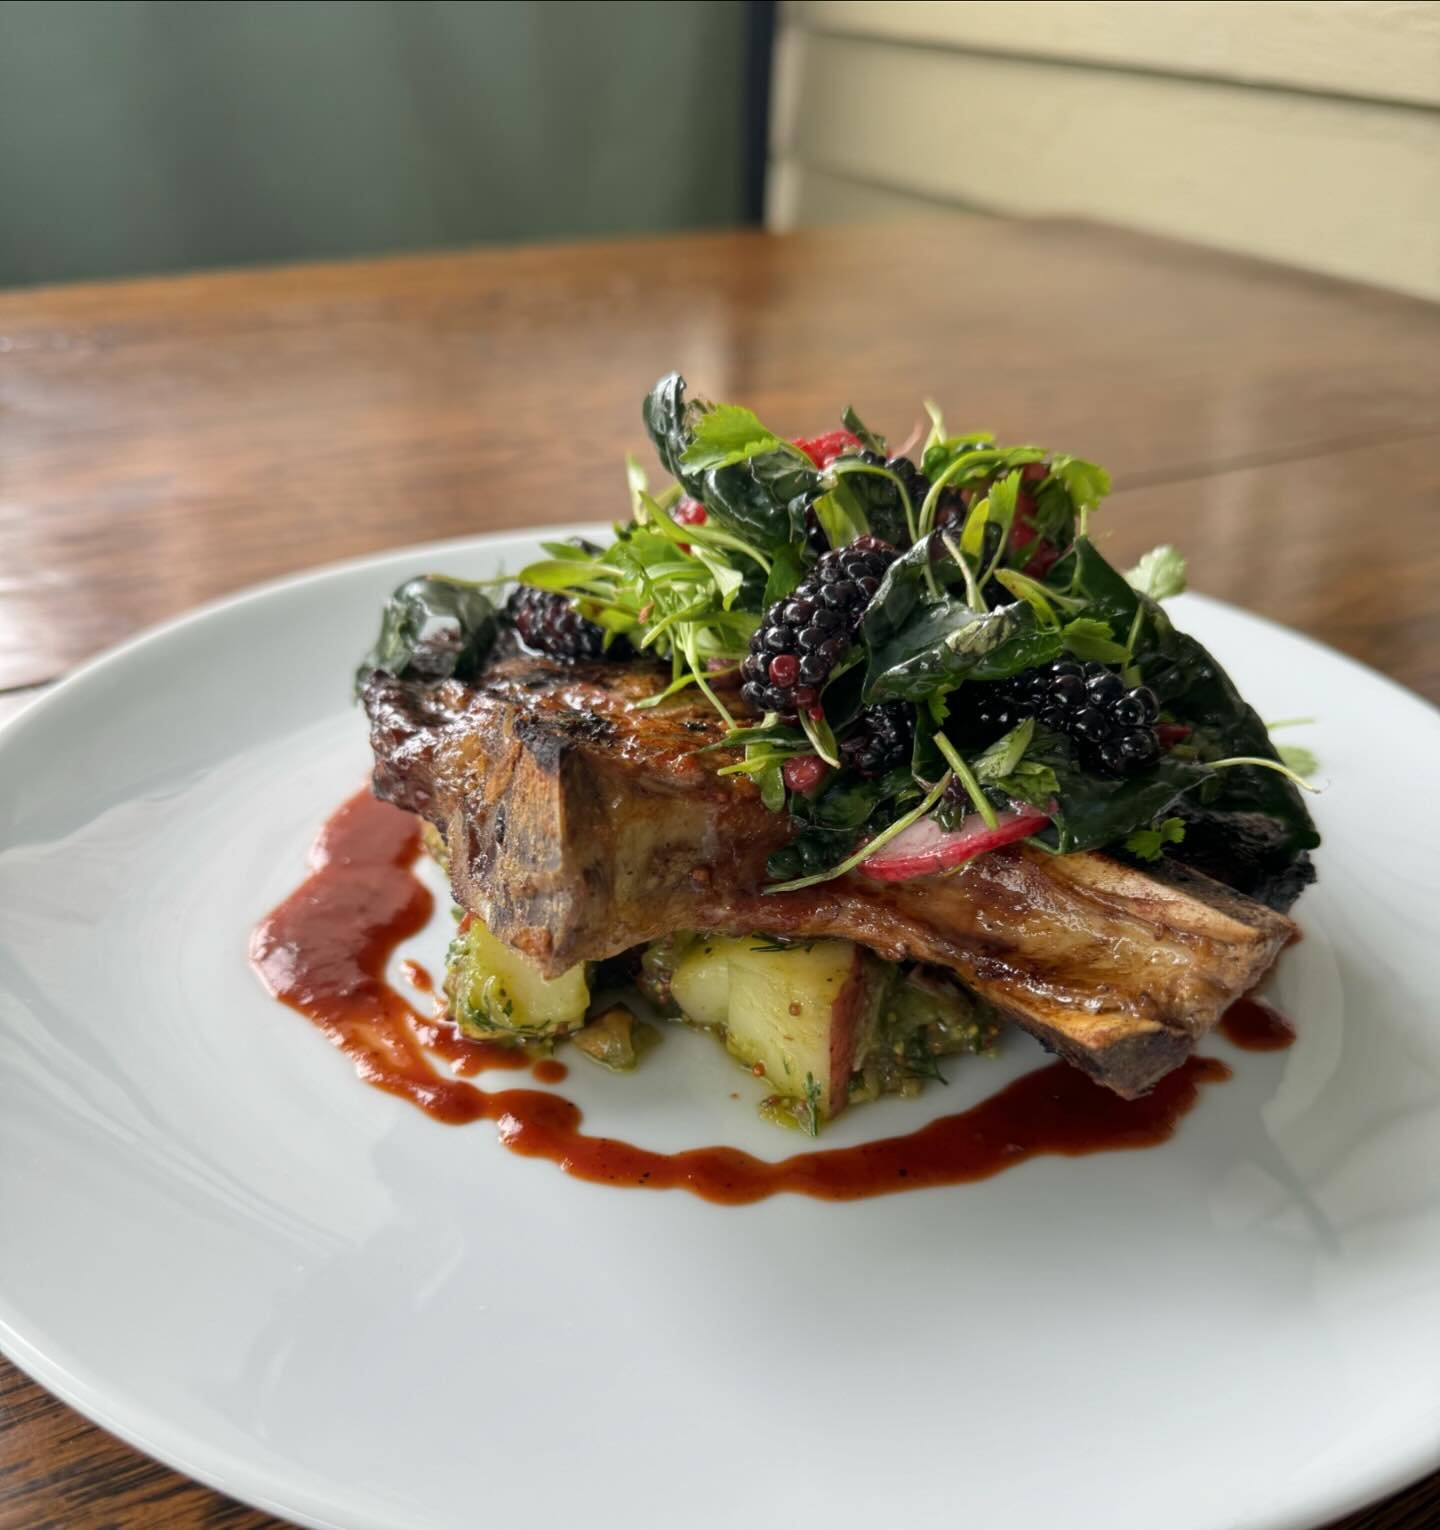 Grilled barbecue pork chop with ramp potato salad, guanciale, kale and berry salad, and berry gastrique. 

Come try this beautiful pork chop from Baker farm! It&rsquo;s the perfect thing to get you excited for summer! ☀️🍓🫐🐷